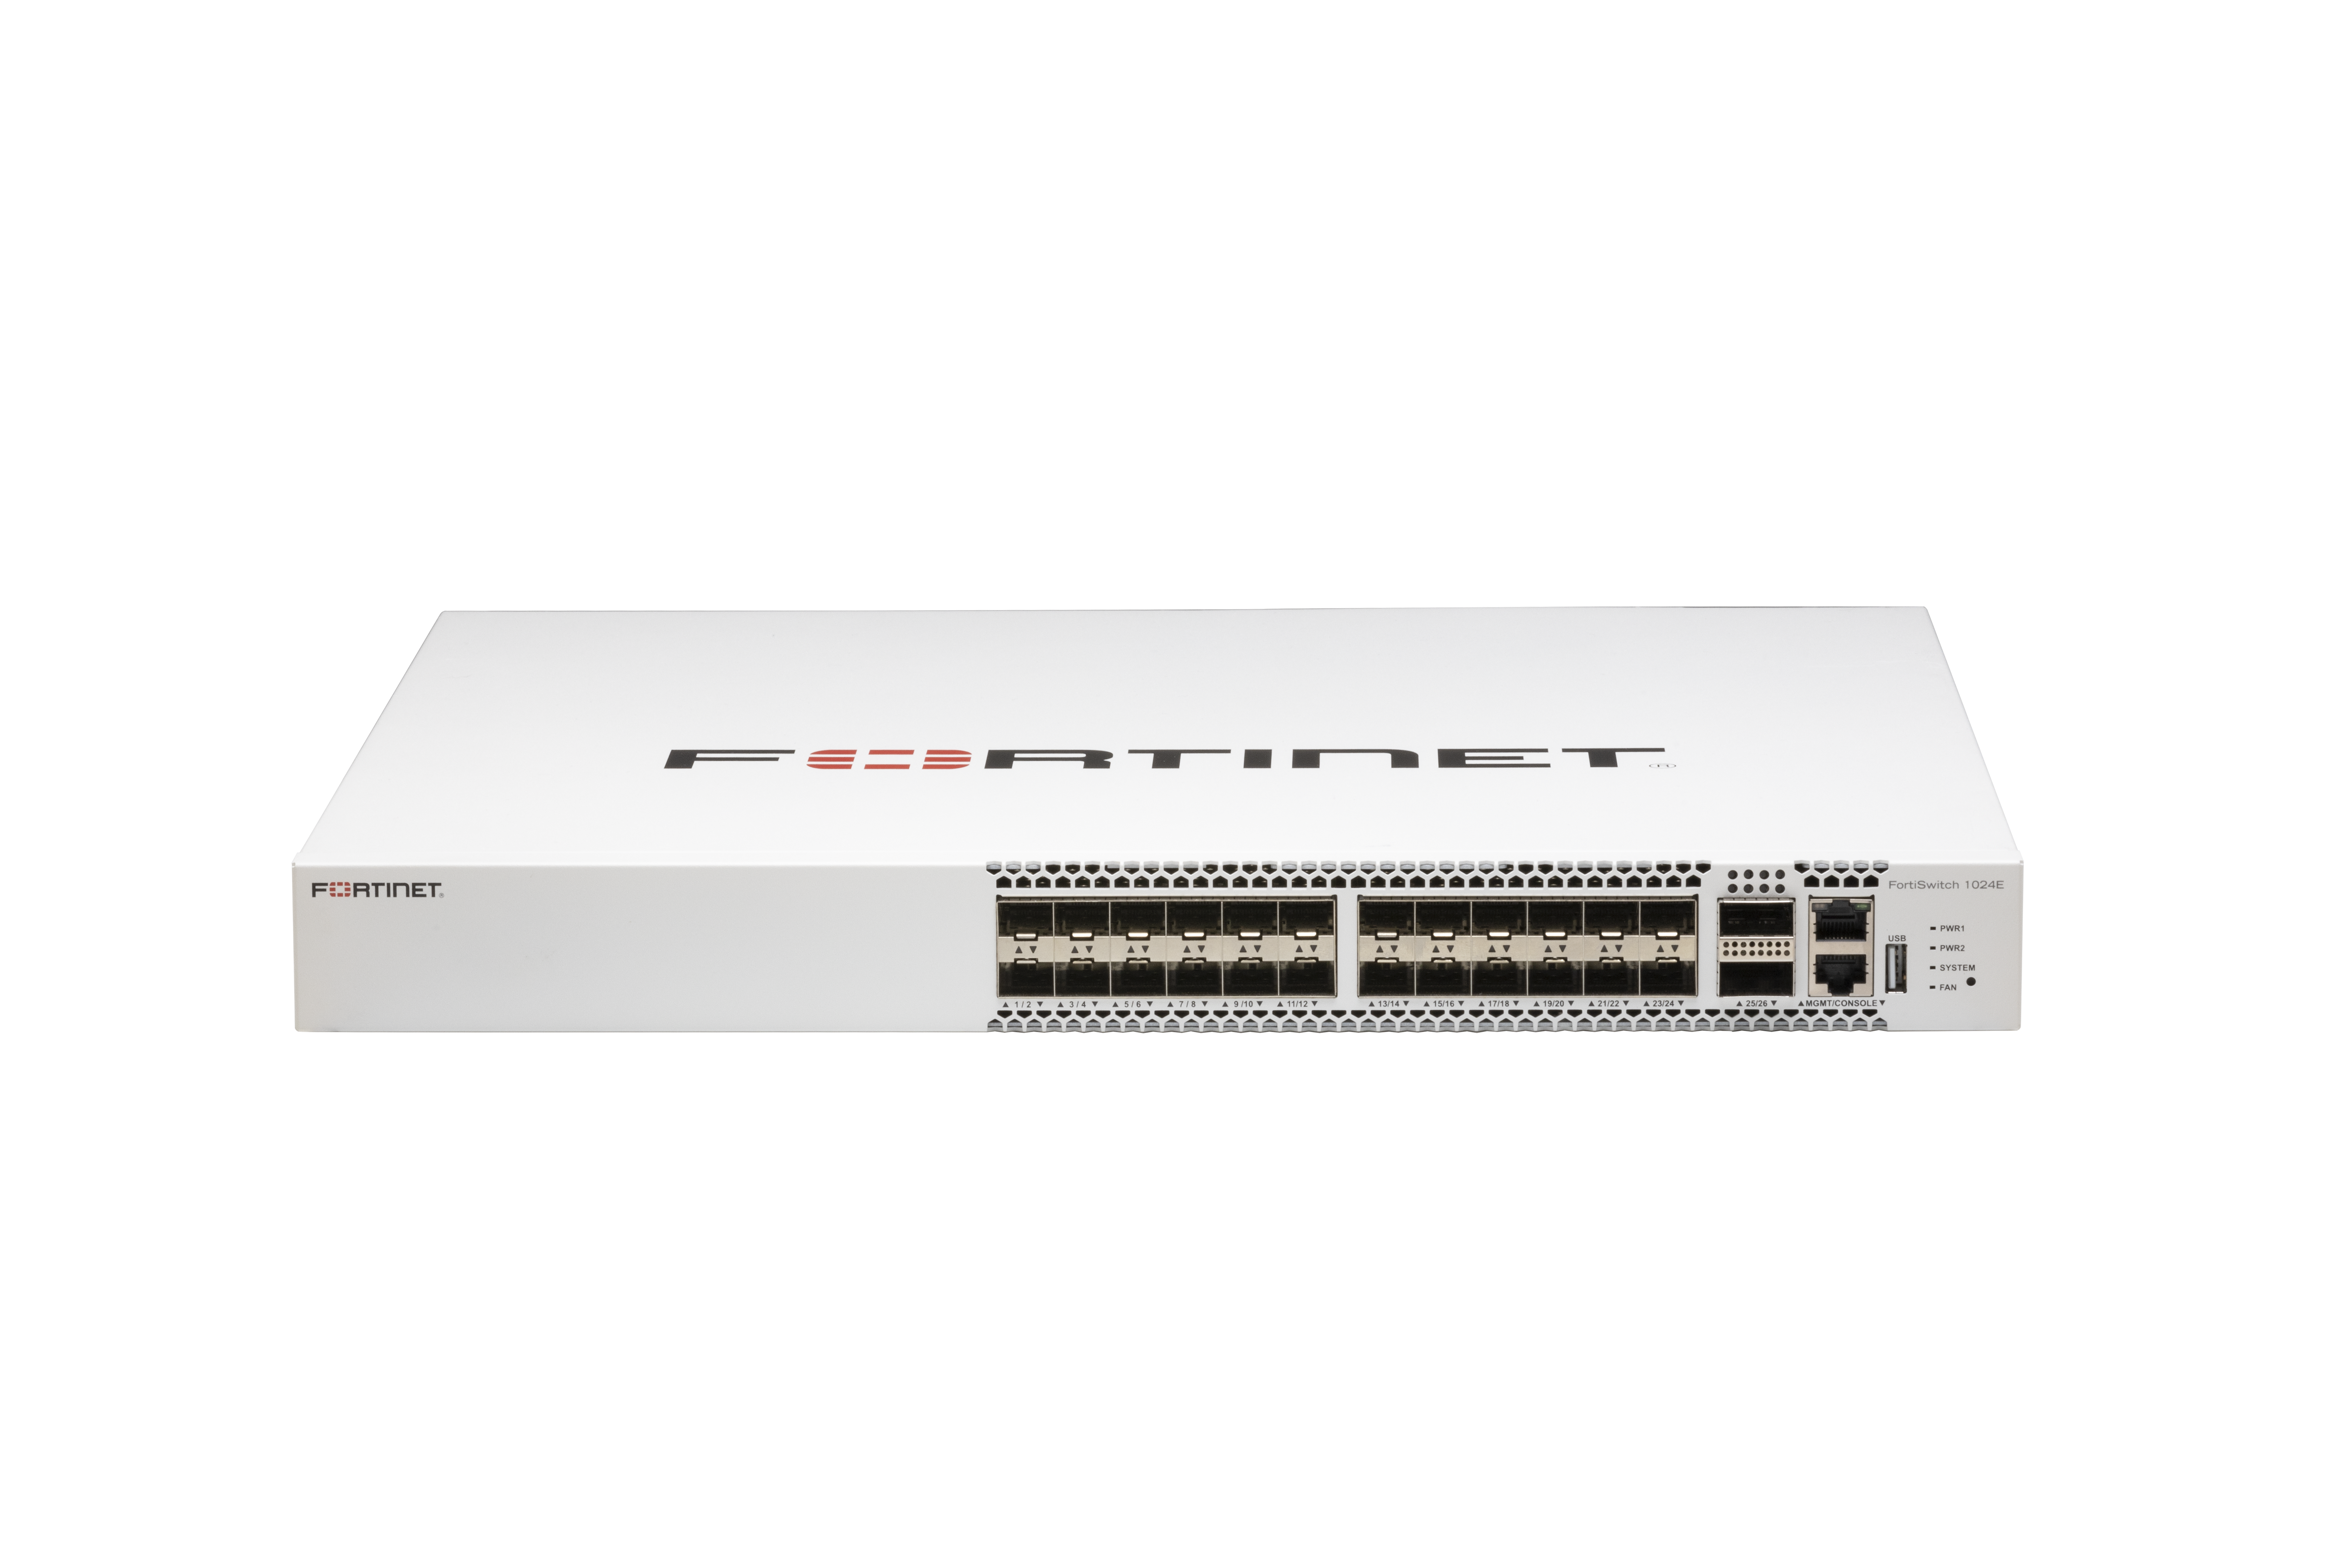 Fortinet FortiSwitch 1024E